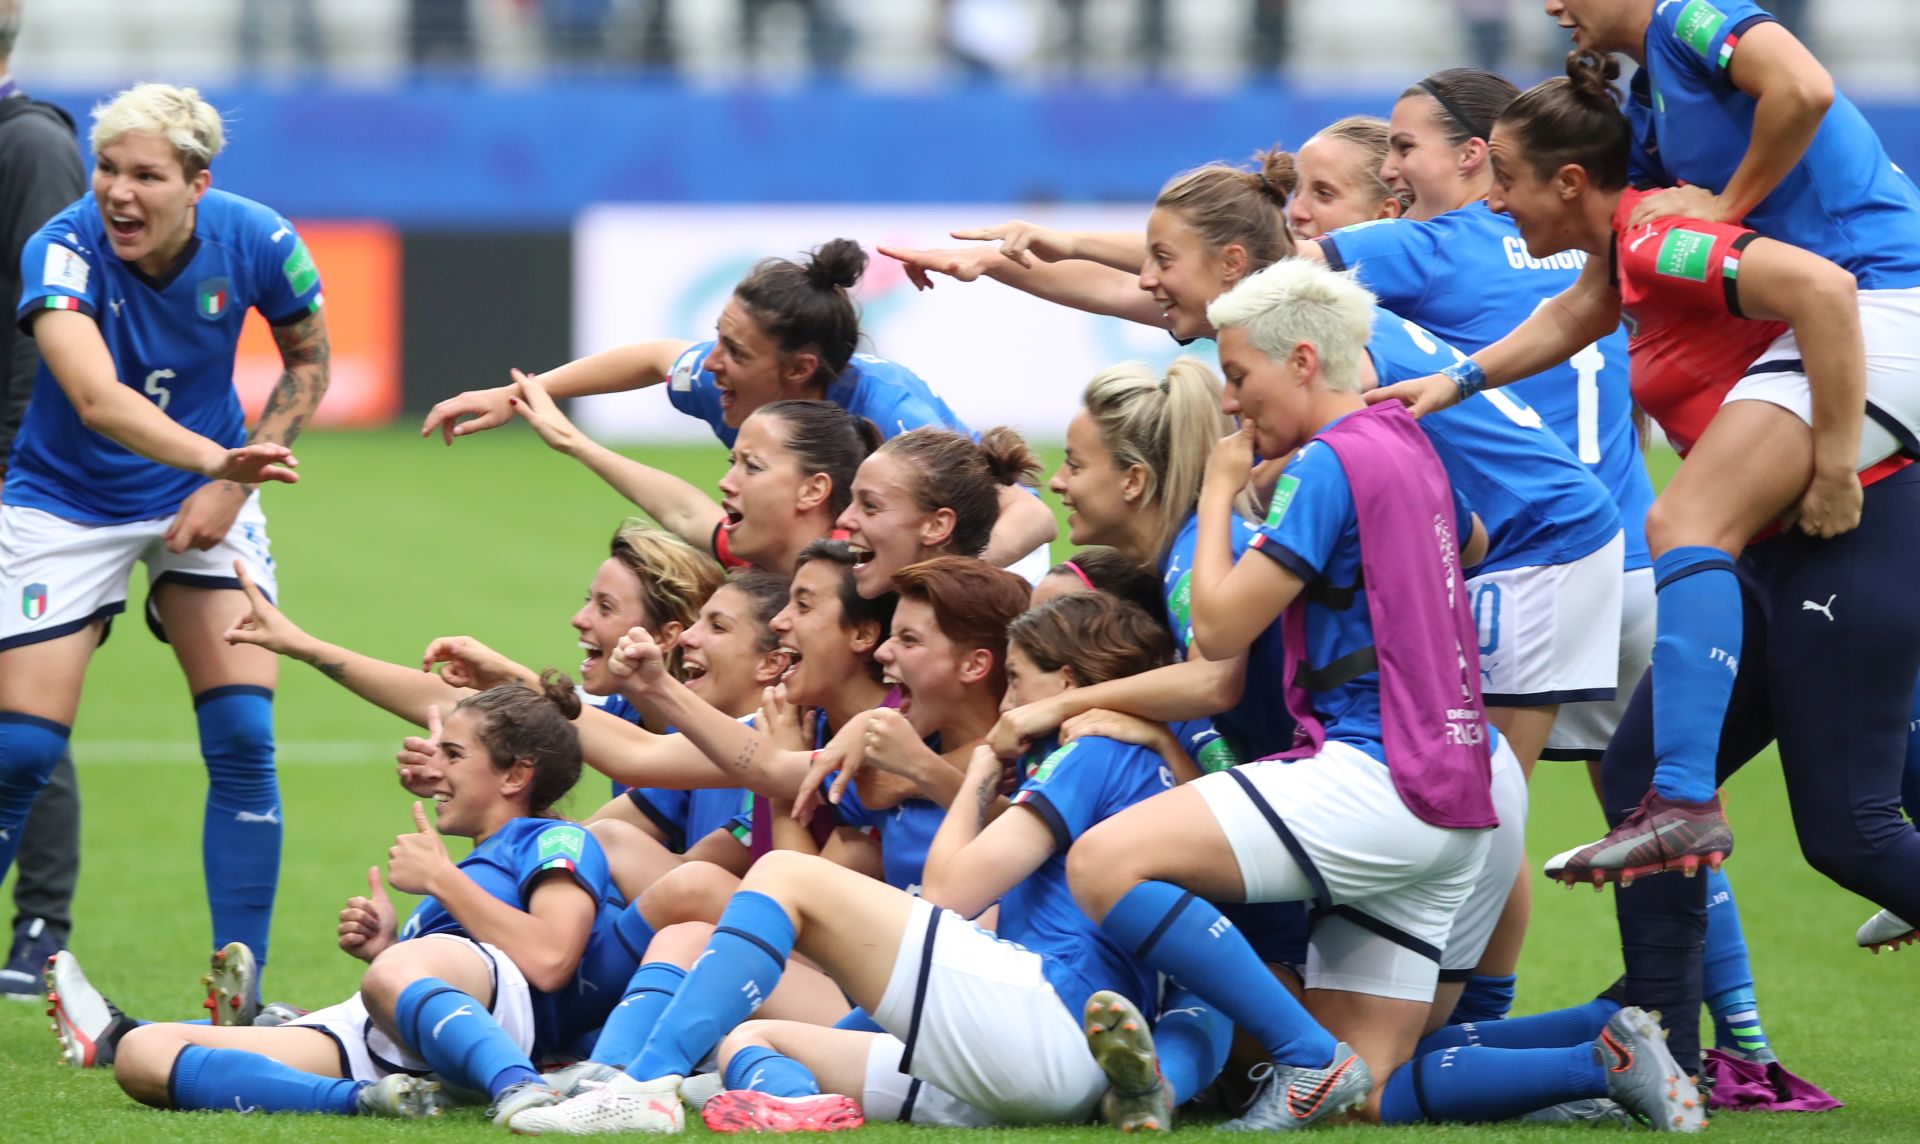 epa07648599 Italy players pose after the preliminary round match between Jamaica and Italy at the FIFA Women's World Cup 2019 in Reims, France, 14 June 2019.  EPA/TOLGA BOZOGLU